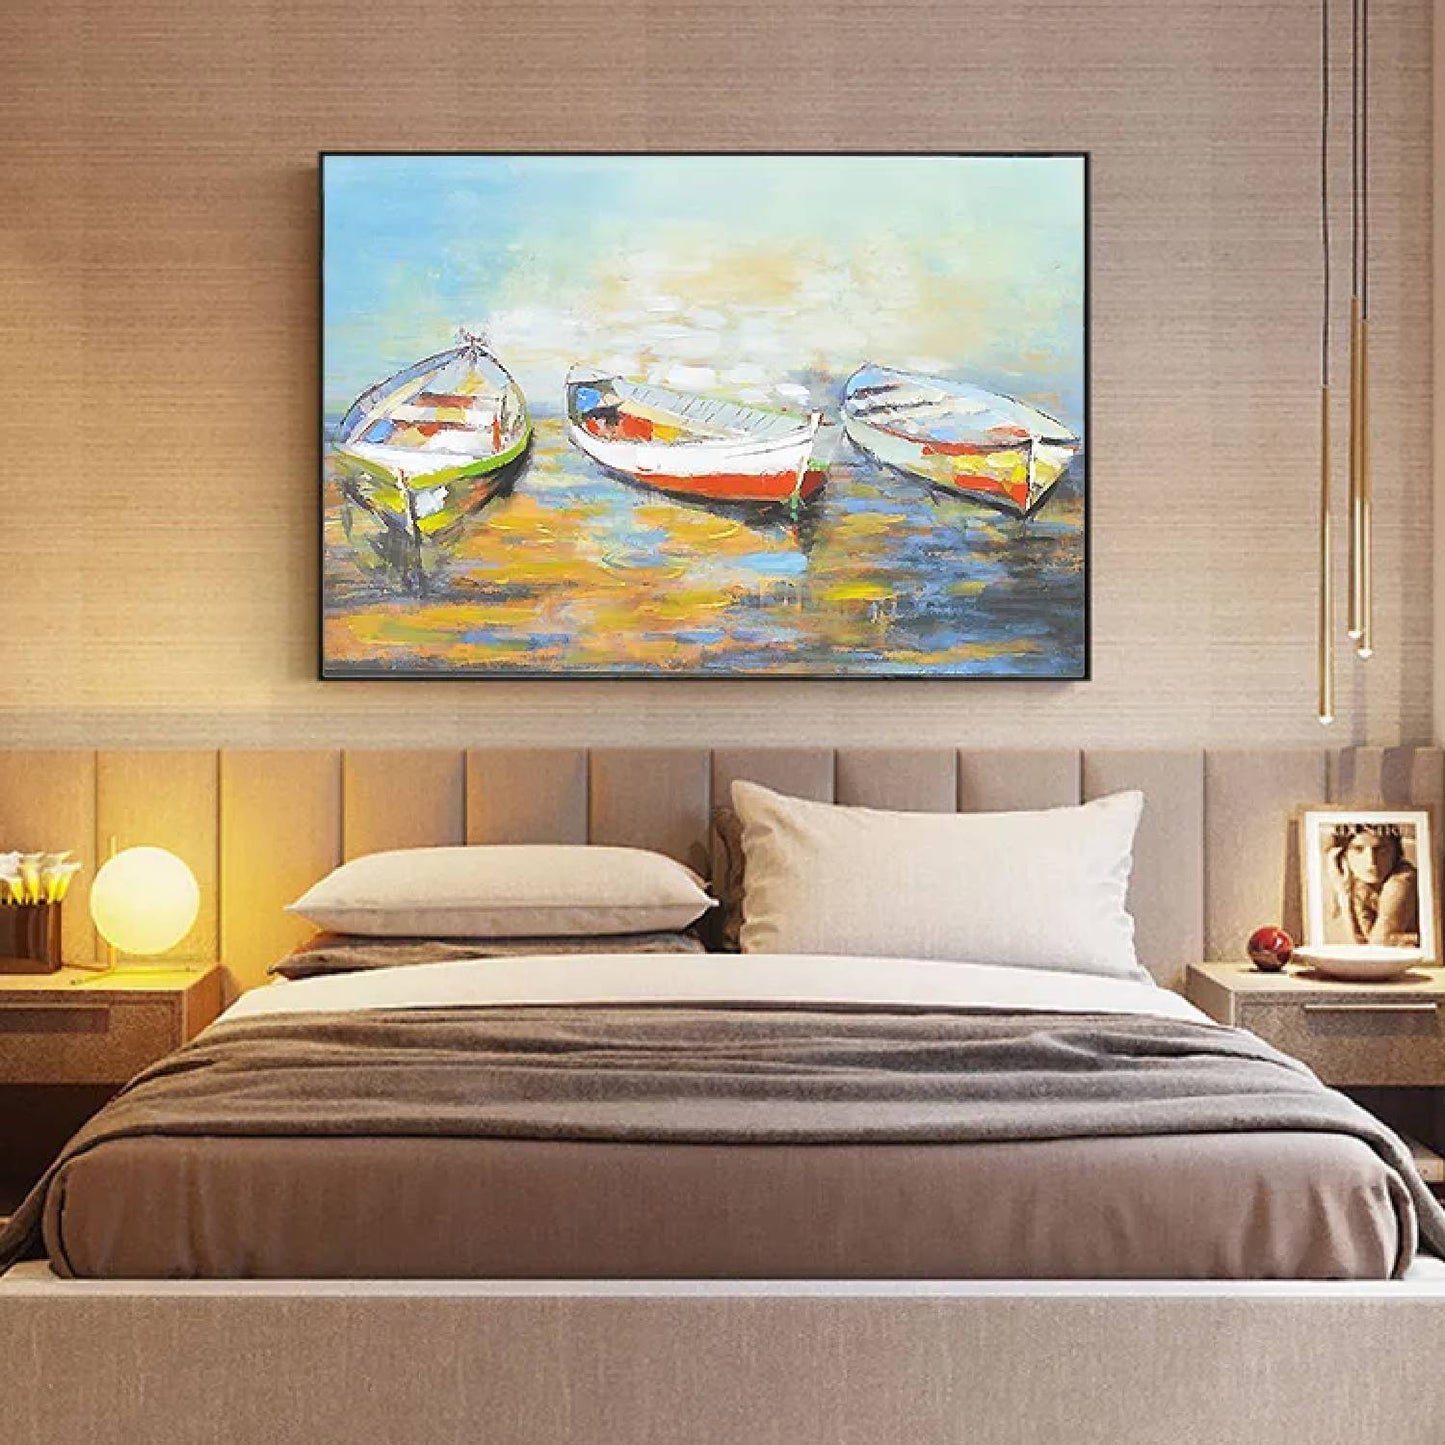 Blue Lake Fishing Boats Textured Canvas Painting